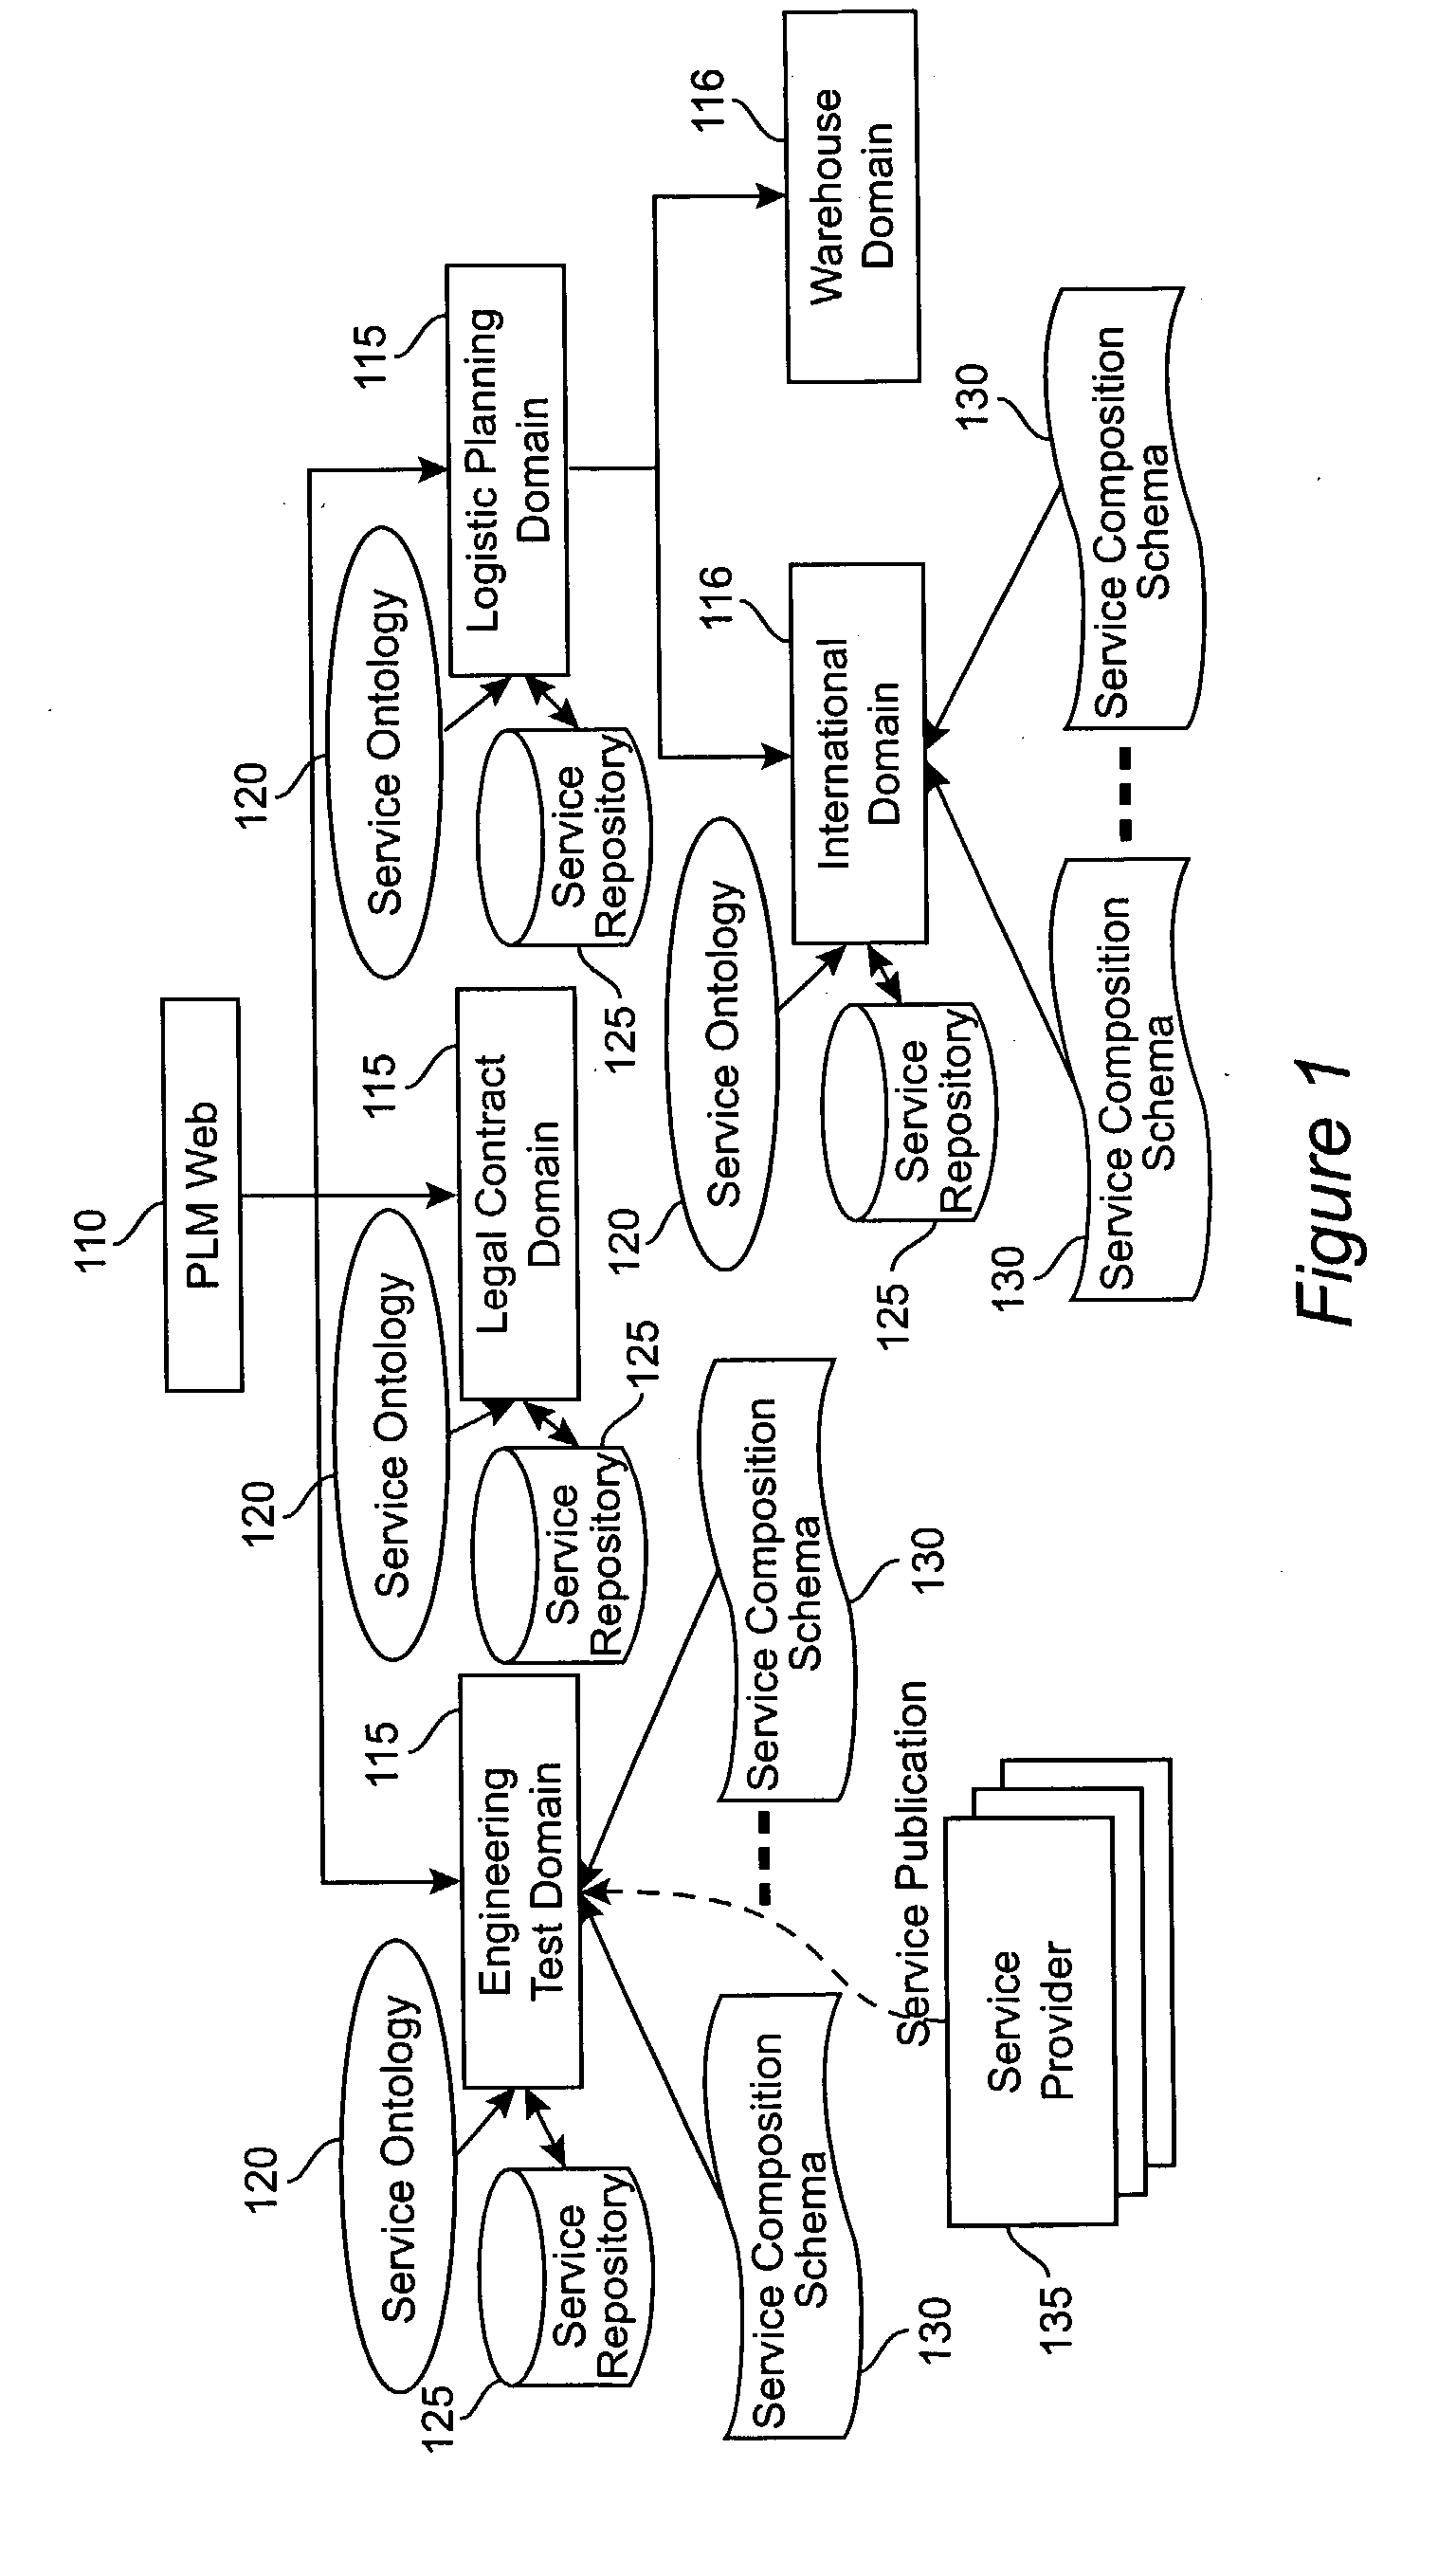 Method and apparatus for product lifecycle management in a distributed environment enabled by dynamic business process composition and execution by rule inference